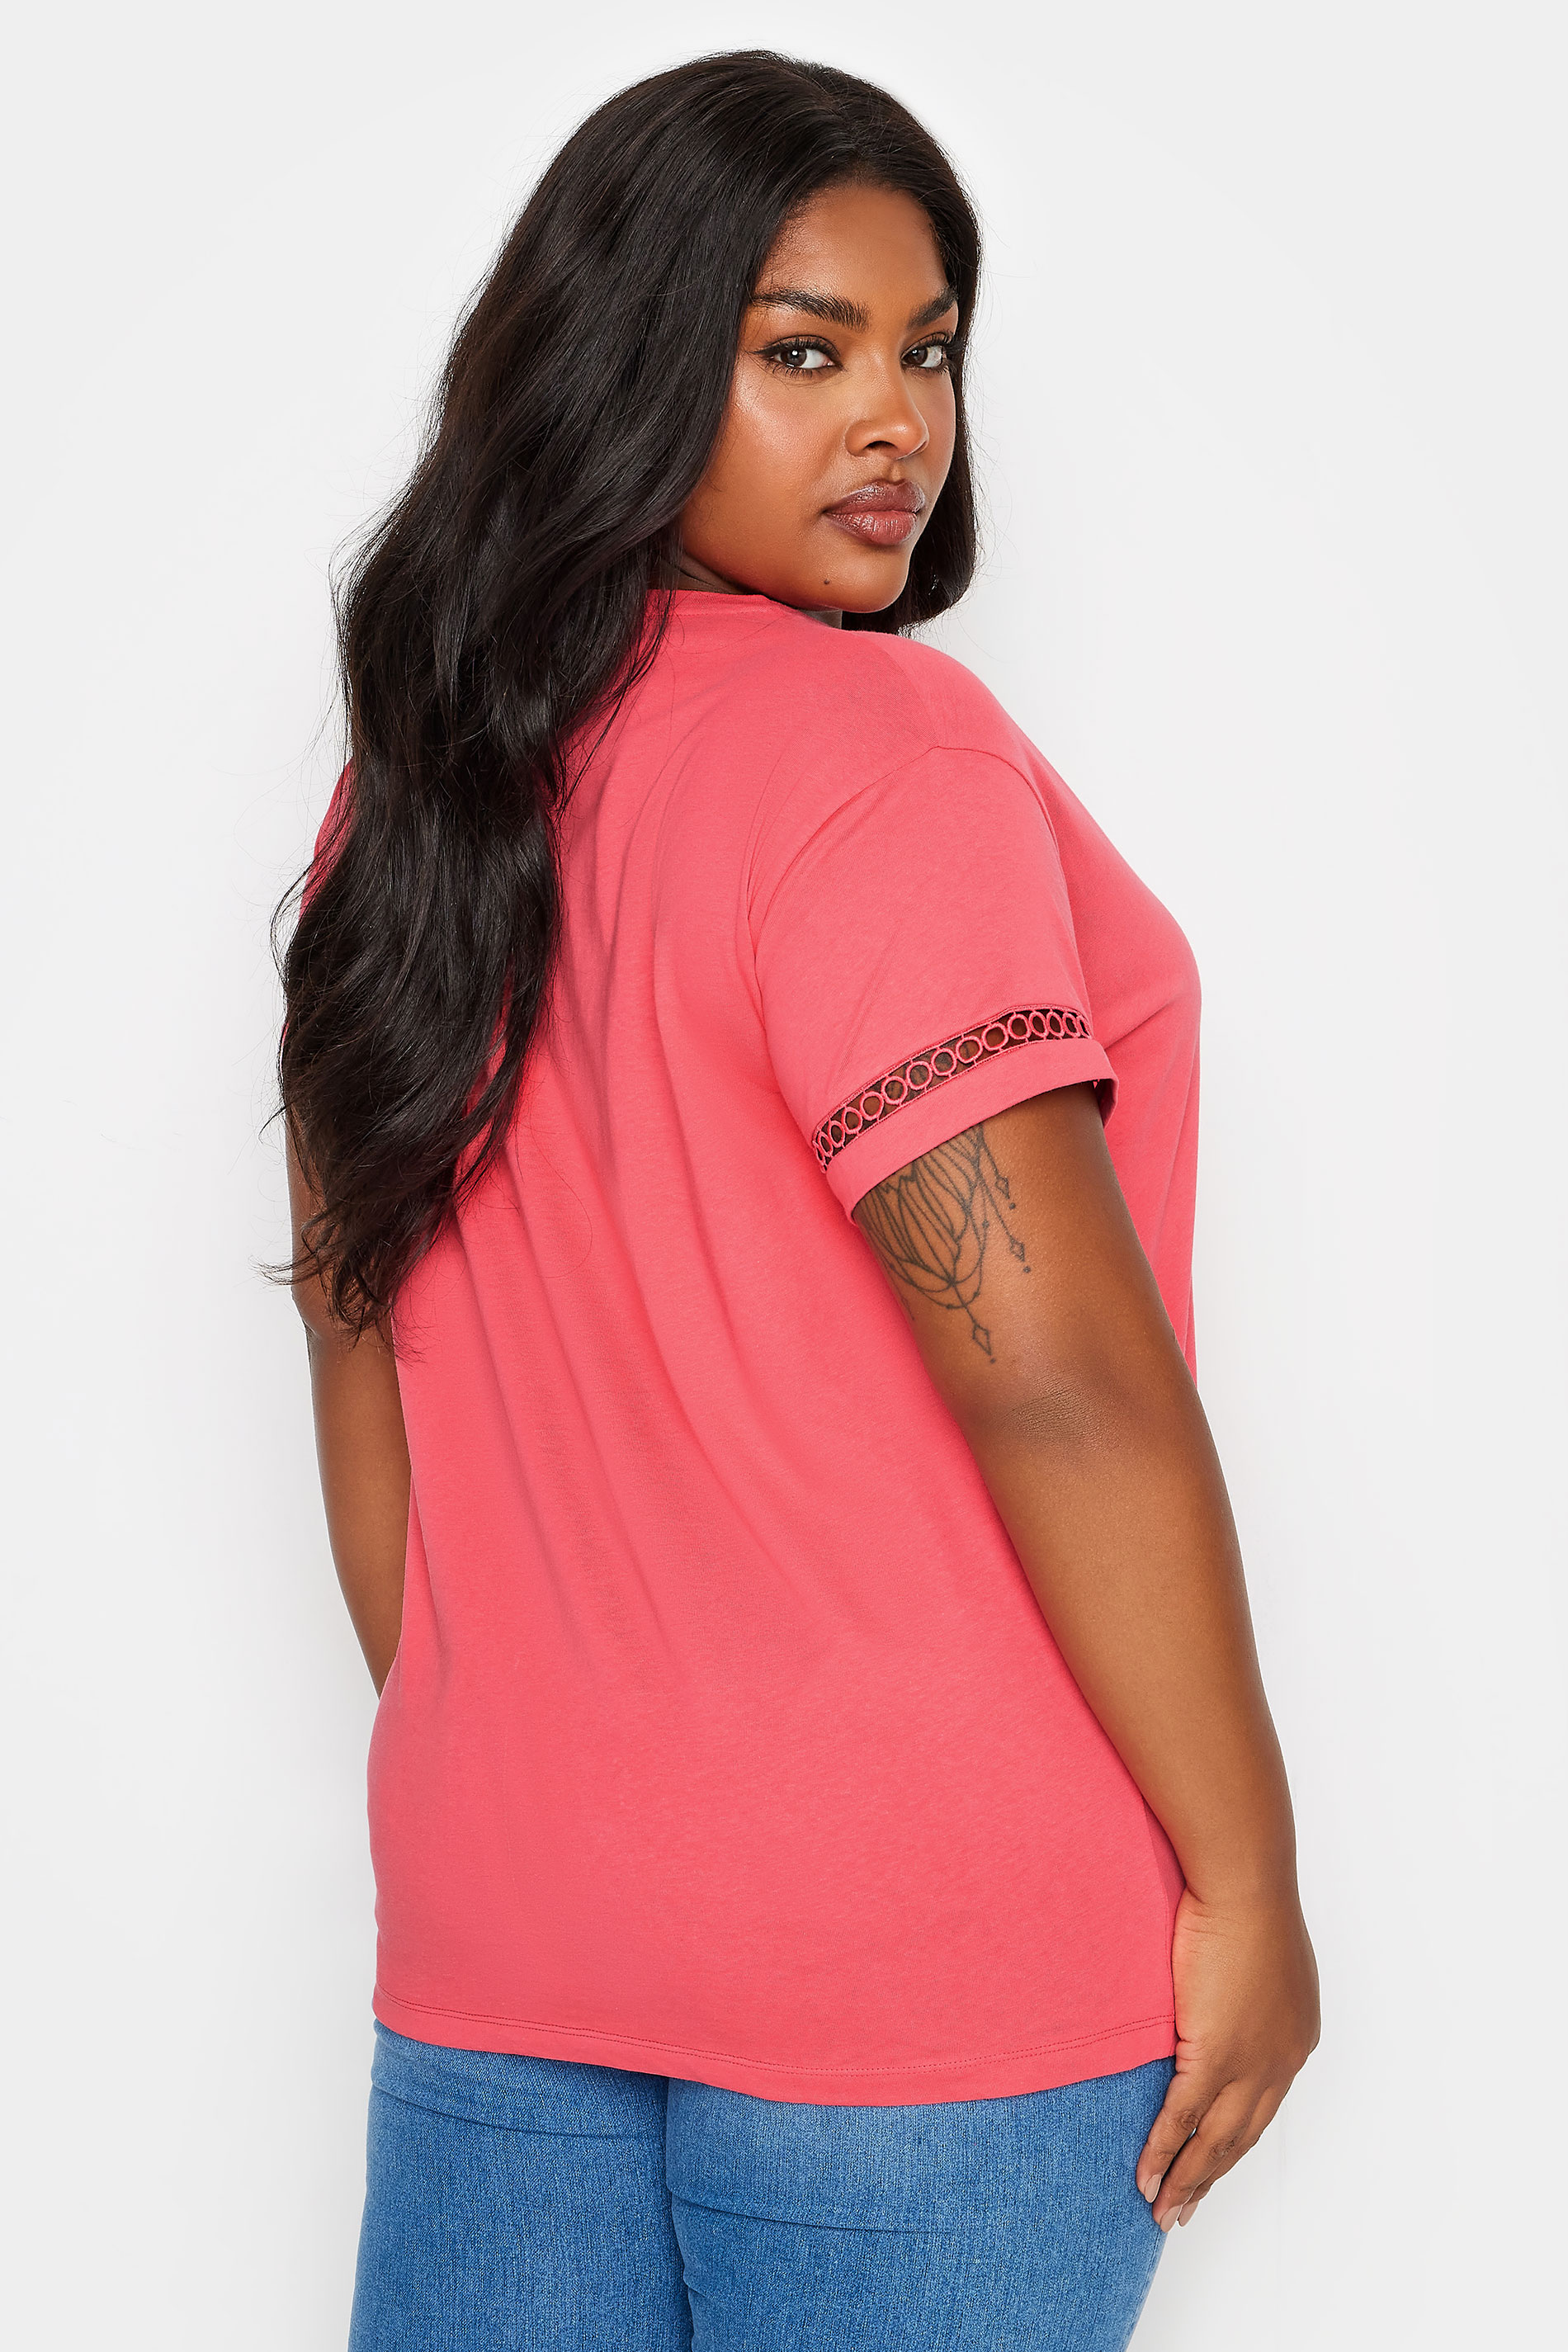 LIMITED COLLECTION Plus Size Coral Pink Crochet Trim Short Sleeve T-Shirt | Yours Clothing 3